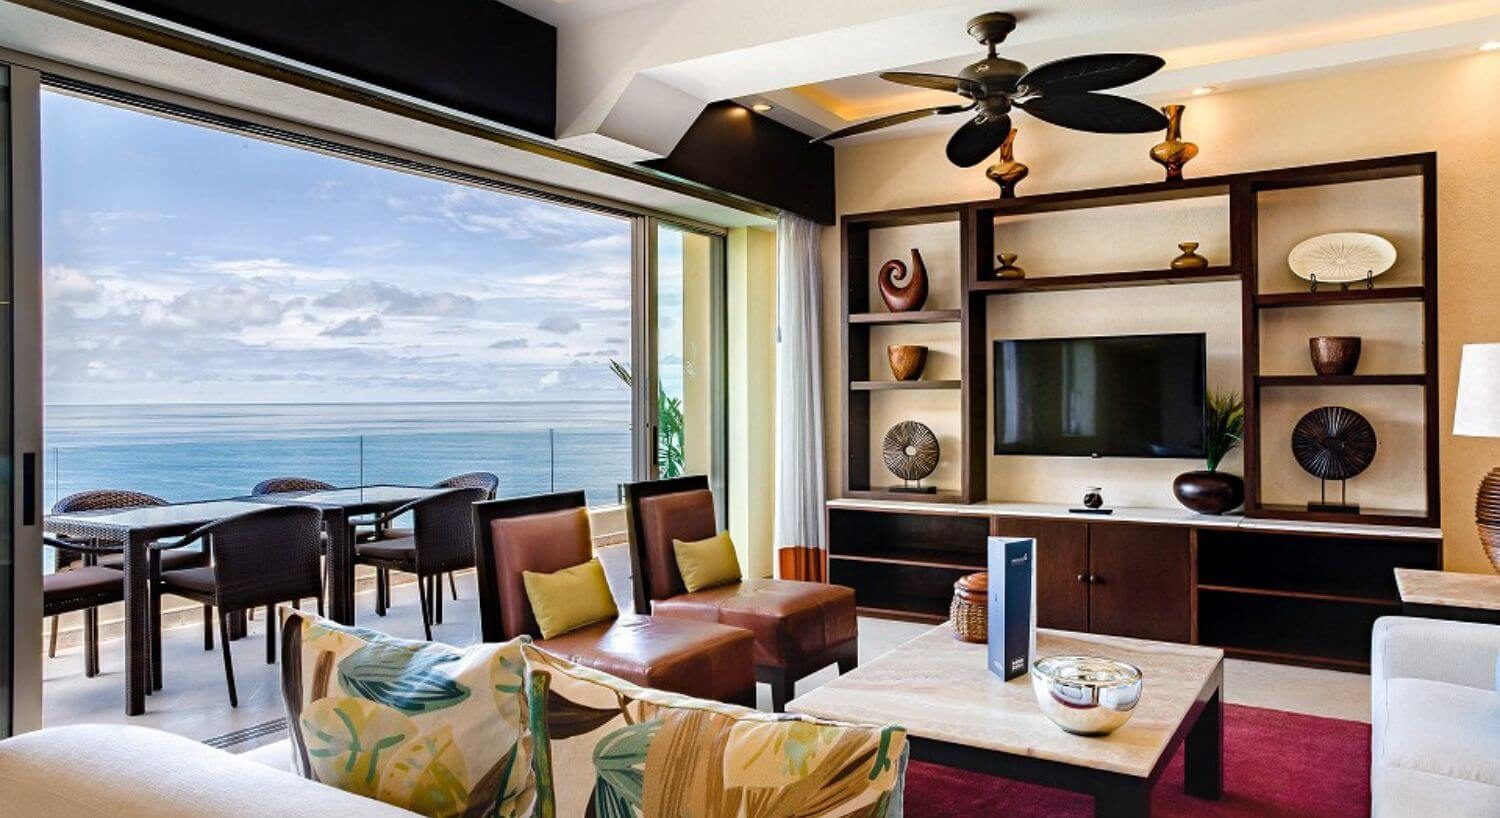 A living room with sofas and plush leather chairs, an entertainment center with flat screen TV, and floor to ceiling sliding doors that lead to a balcony with patio furniture and views of the ocean.